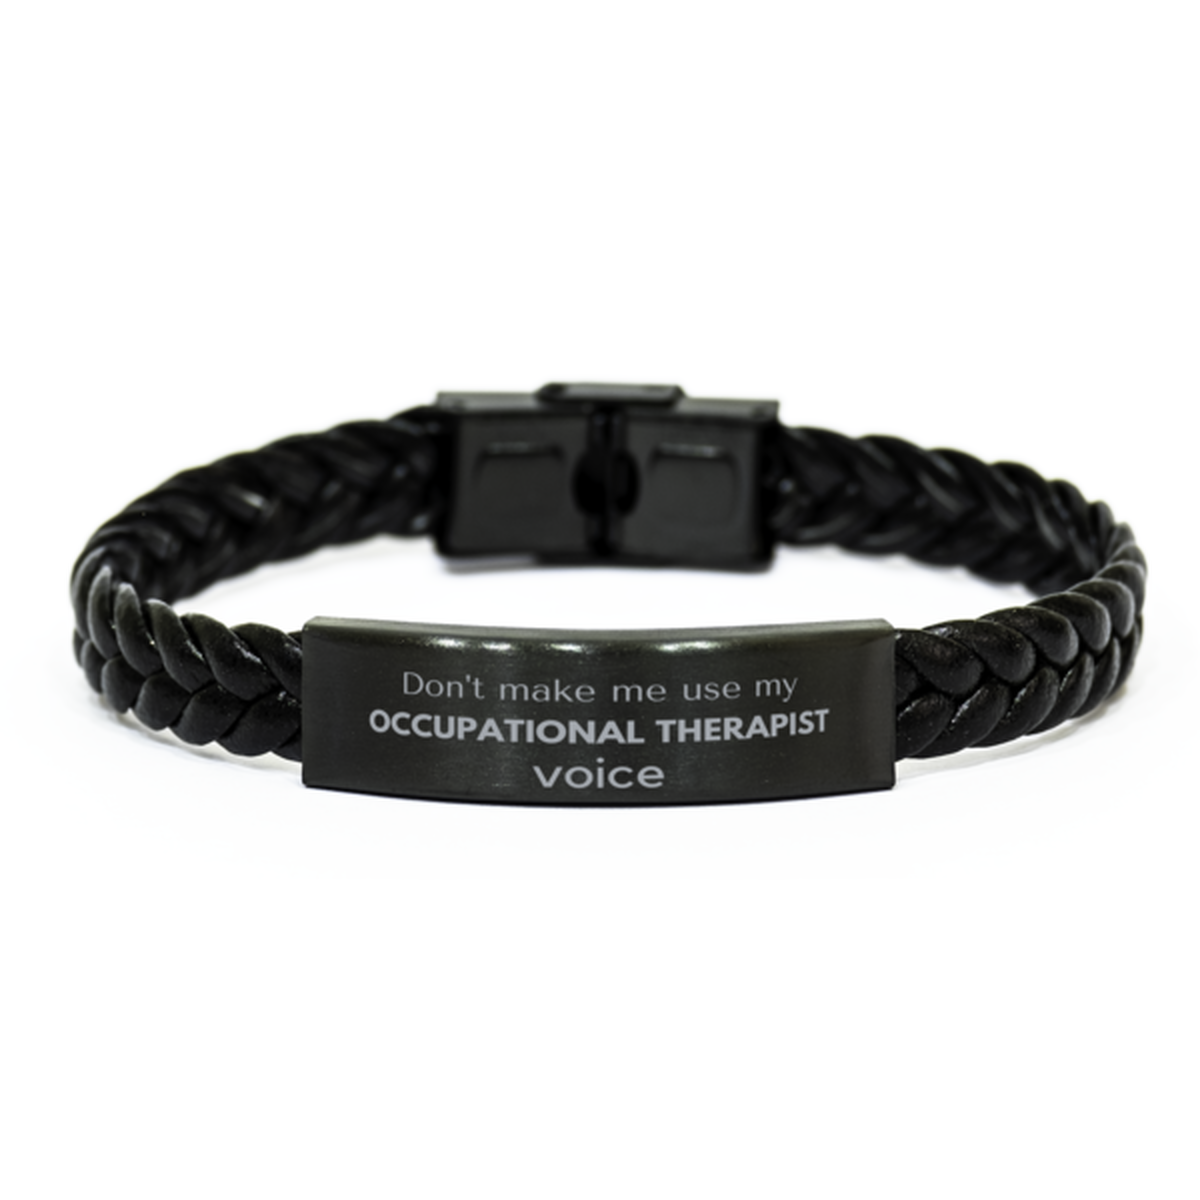 Don't make me use my Occupational Therapist voice, Sarcasm Occupational Therapist Gifts, Christmas Occupational Therapist Braided Leather Bracelet Birthday Unique Gifts For Occupational Therapist Coworkers, Men, Women, Colleague, Friends